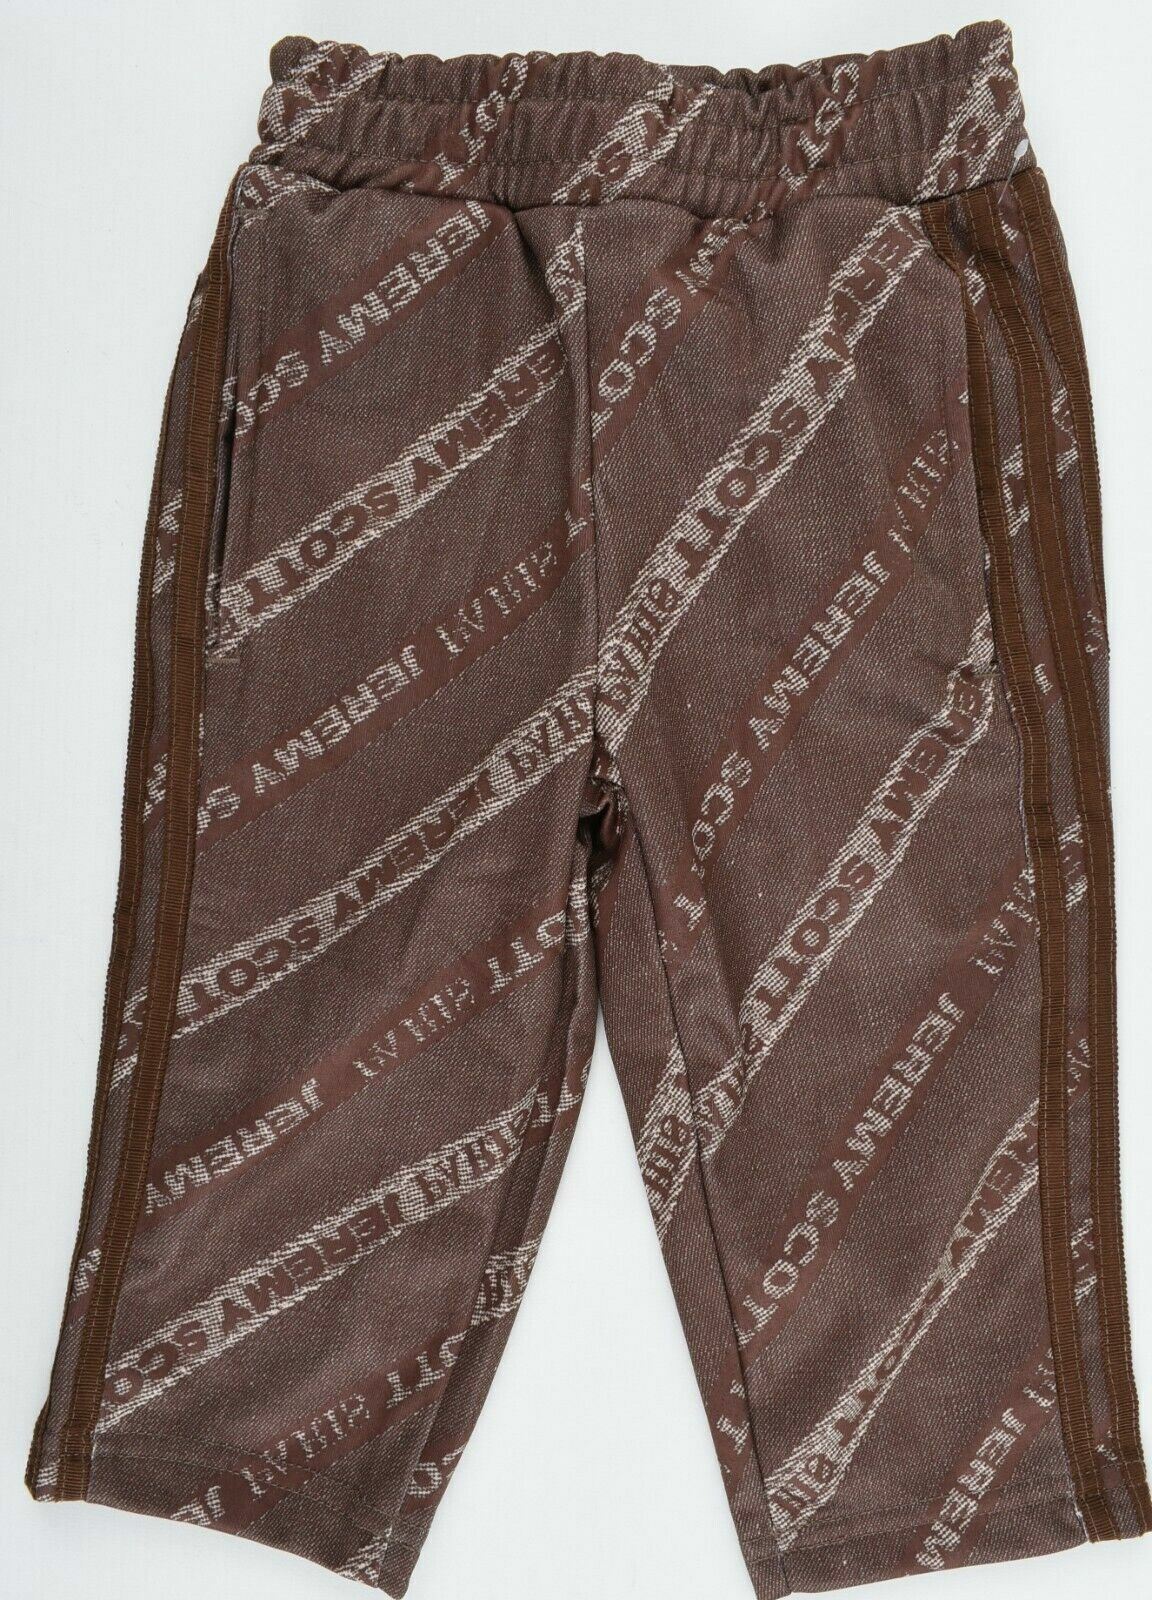 JEREMY SCOTT x ADIDAS Baby Boys'Logo Joggers Trousers Brown 18 m to 24 months